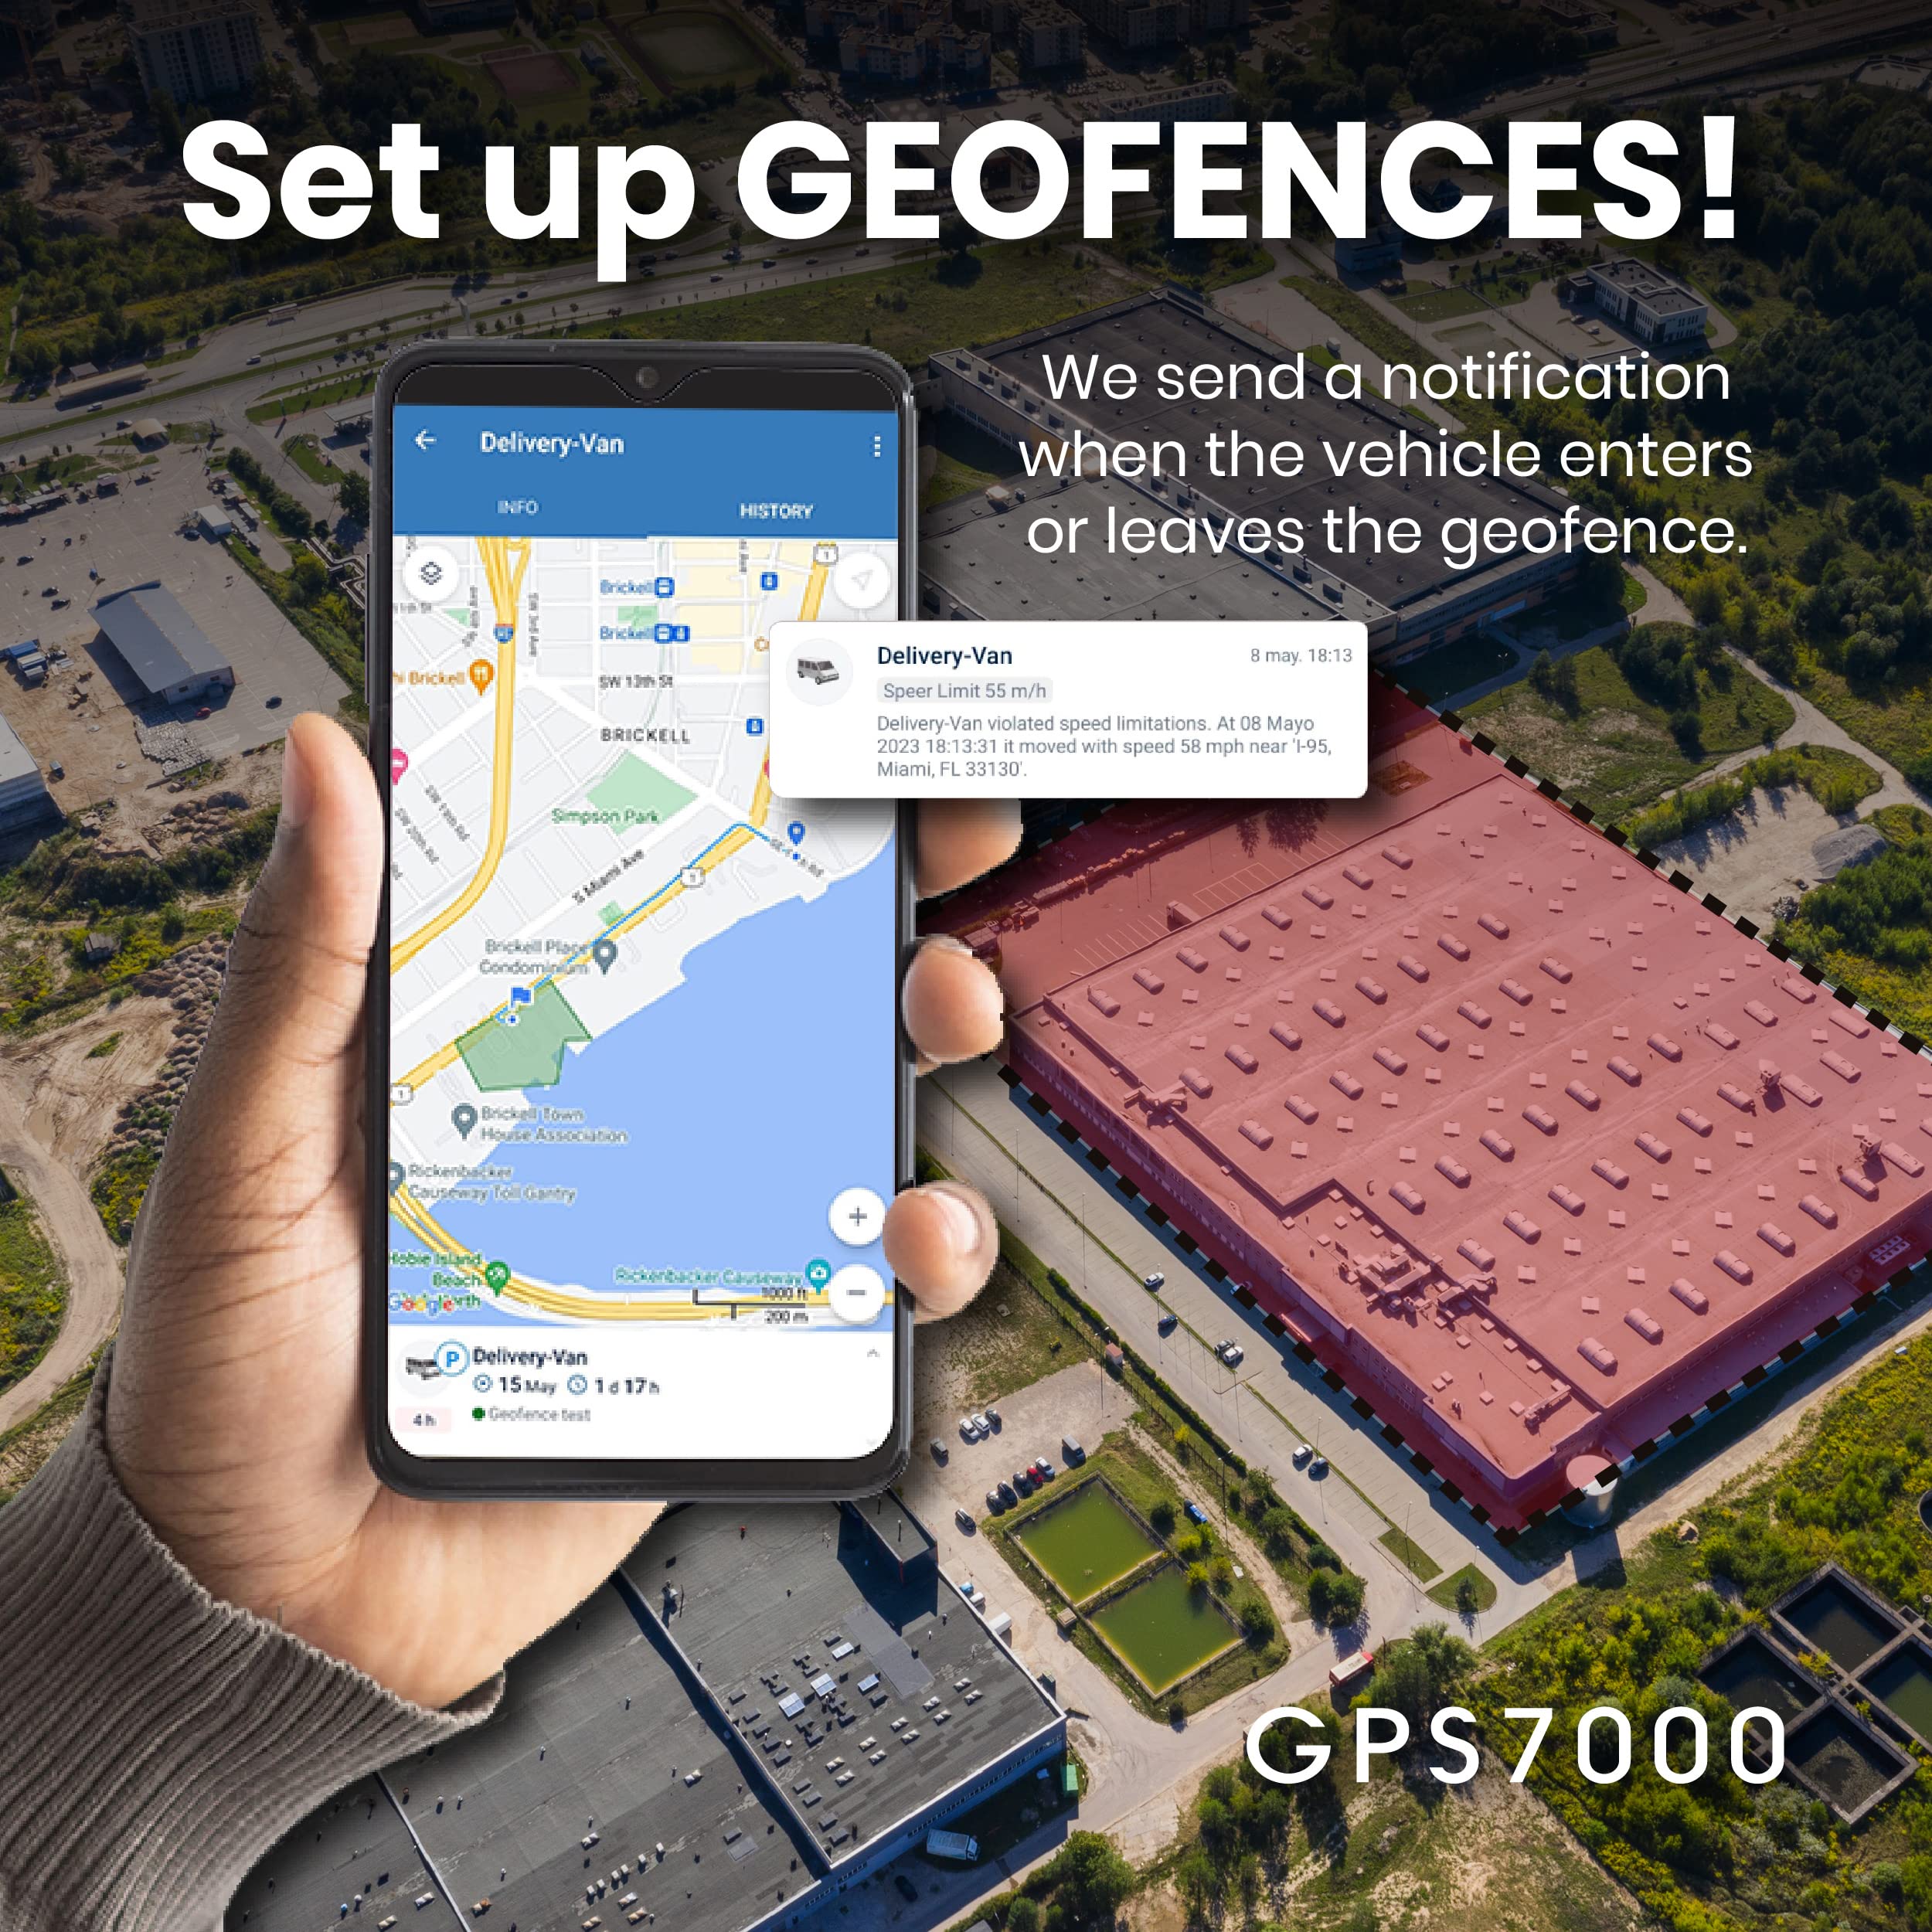 GPS7000 G1-4G LTE Fleet Management Device with Easy Installation. Launch Offer and 10-Day Free Trial